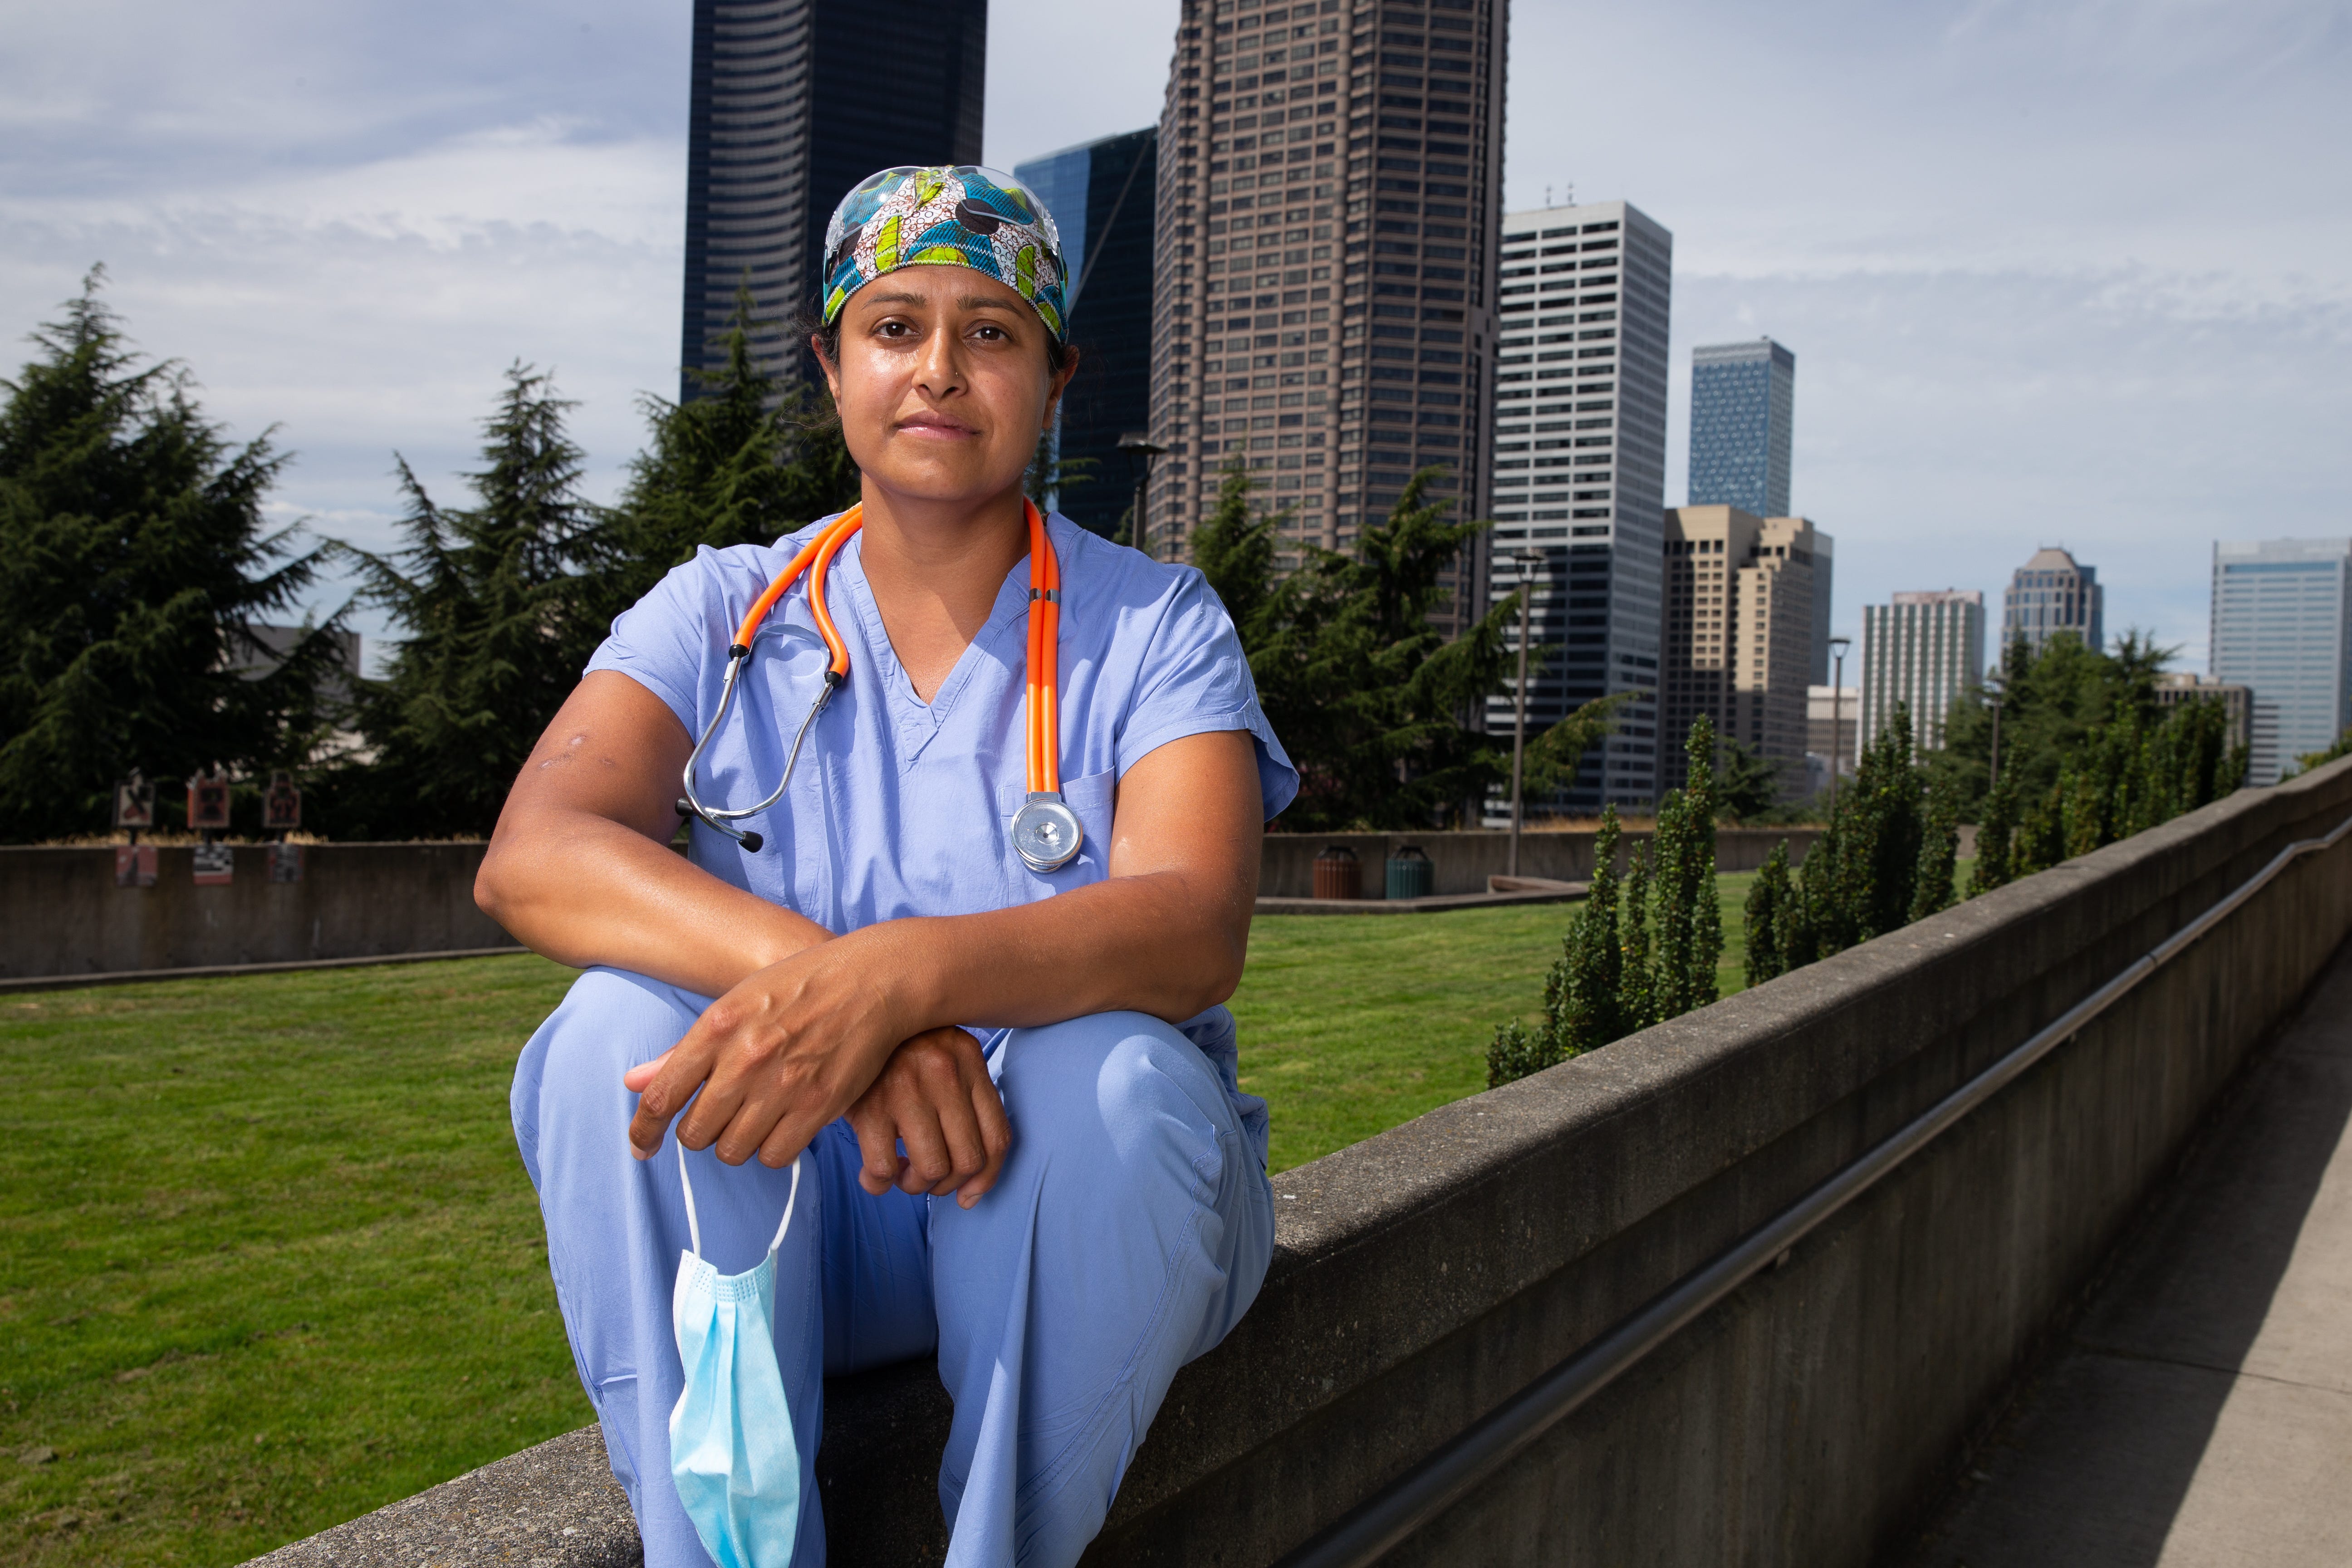 At the center of the first major U.S. outbreak of the coronavirus, Seattle, Dr. Sachita Shah said her hospital struggled to keep up with changing CDC testing guidance.